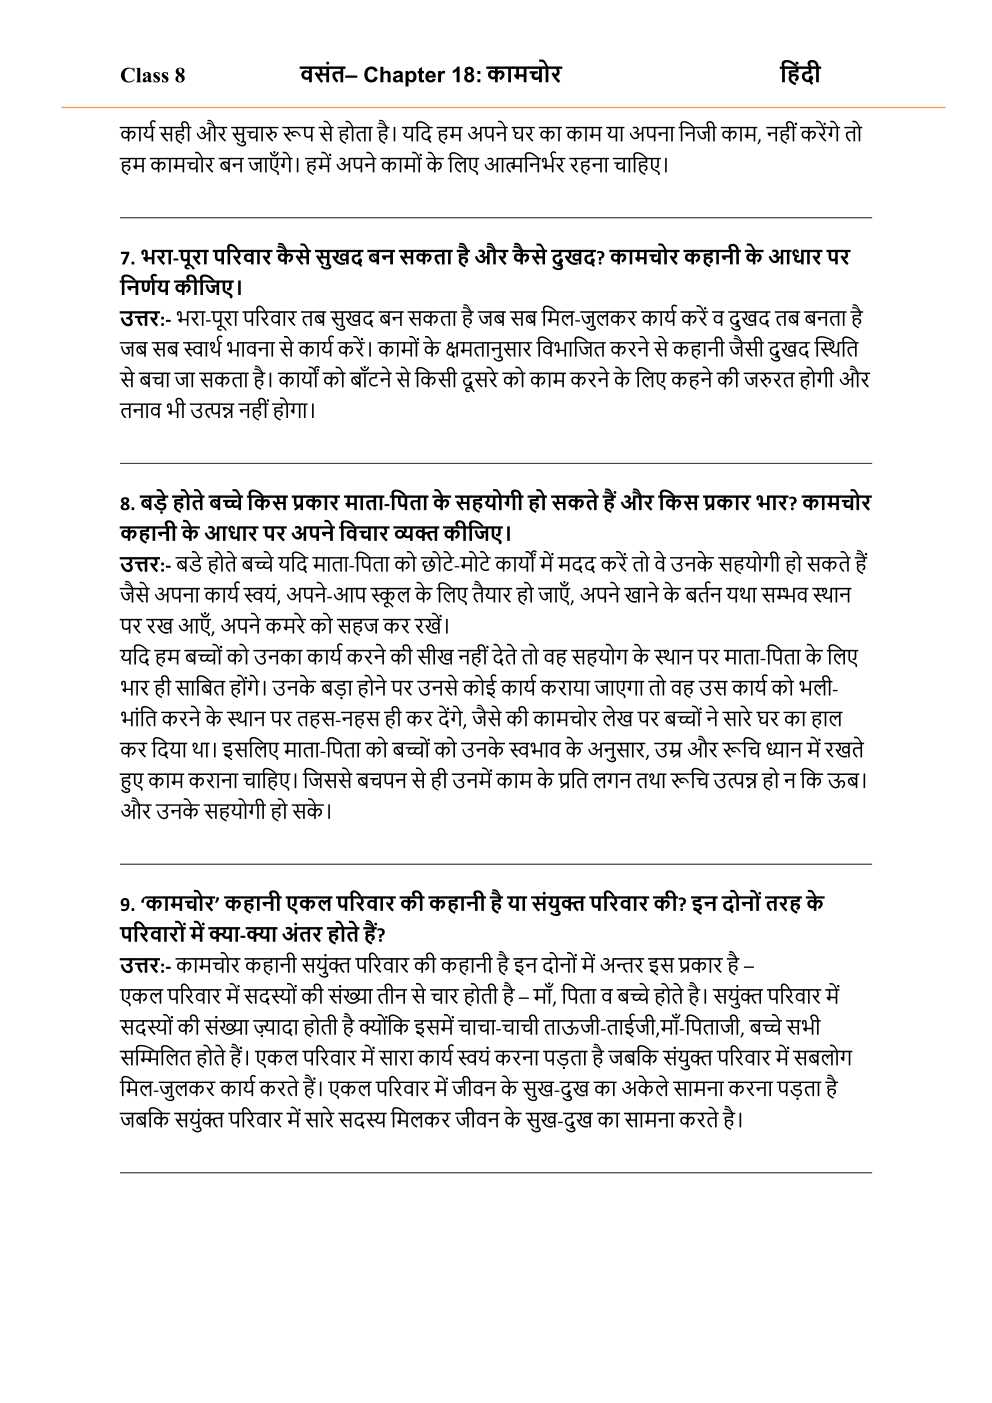 NCERT Solutions For Class 8 Hindi Vasant Chapter 10